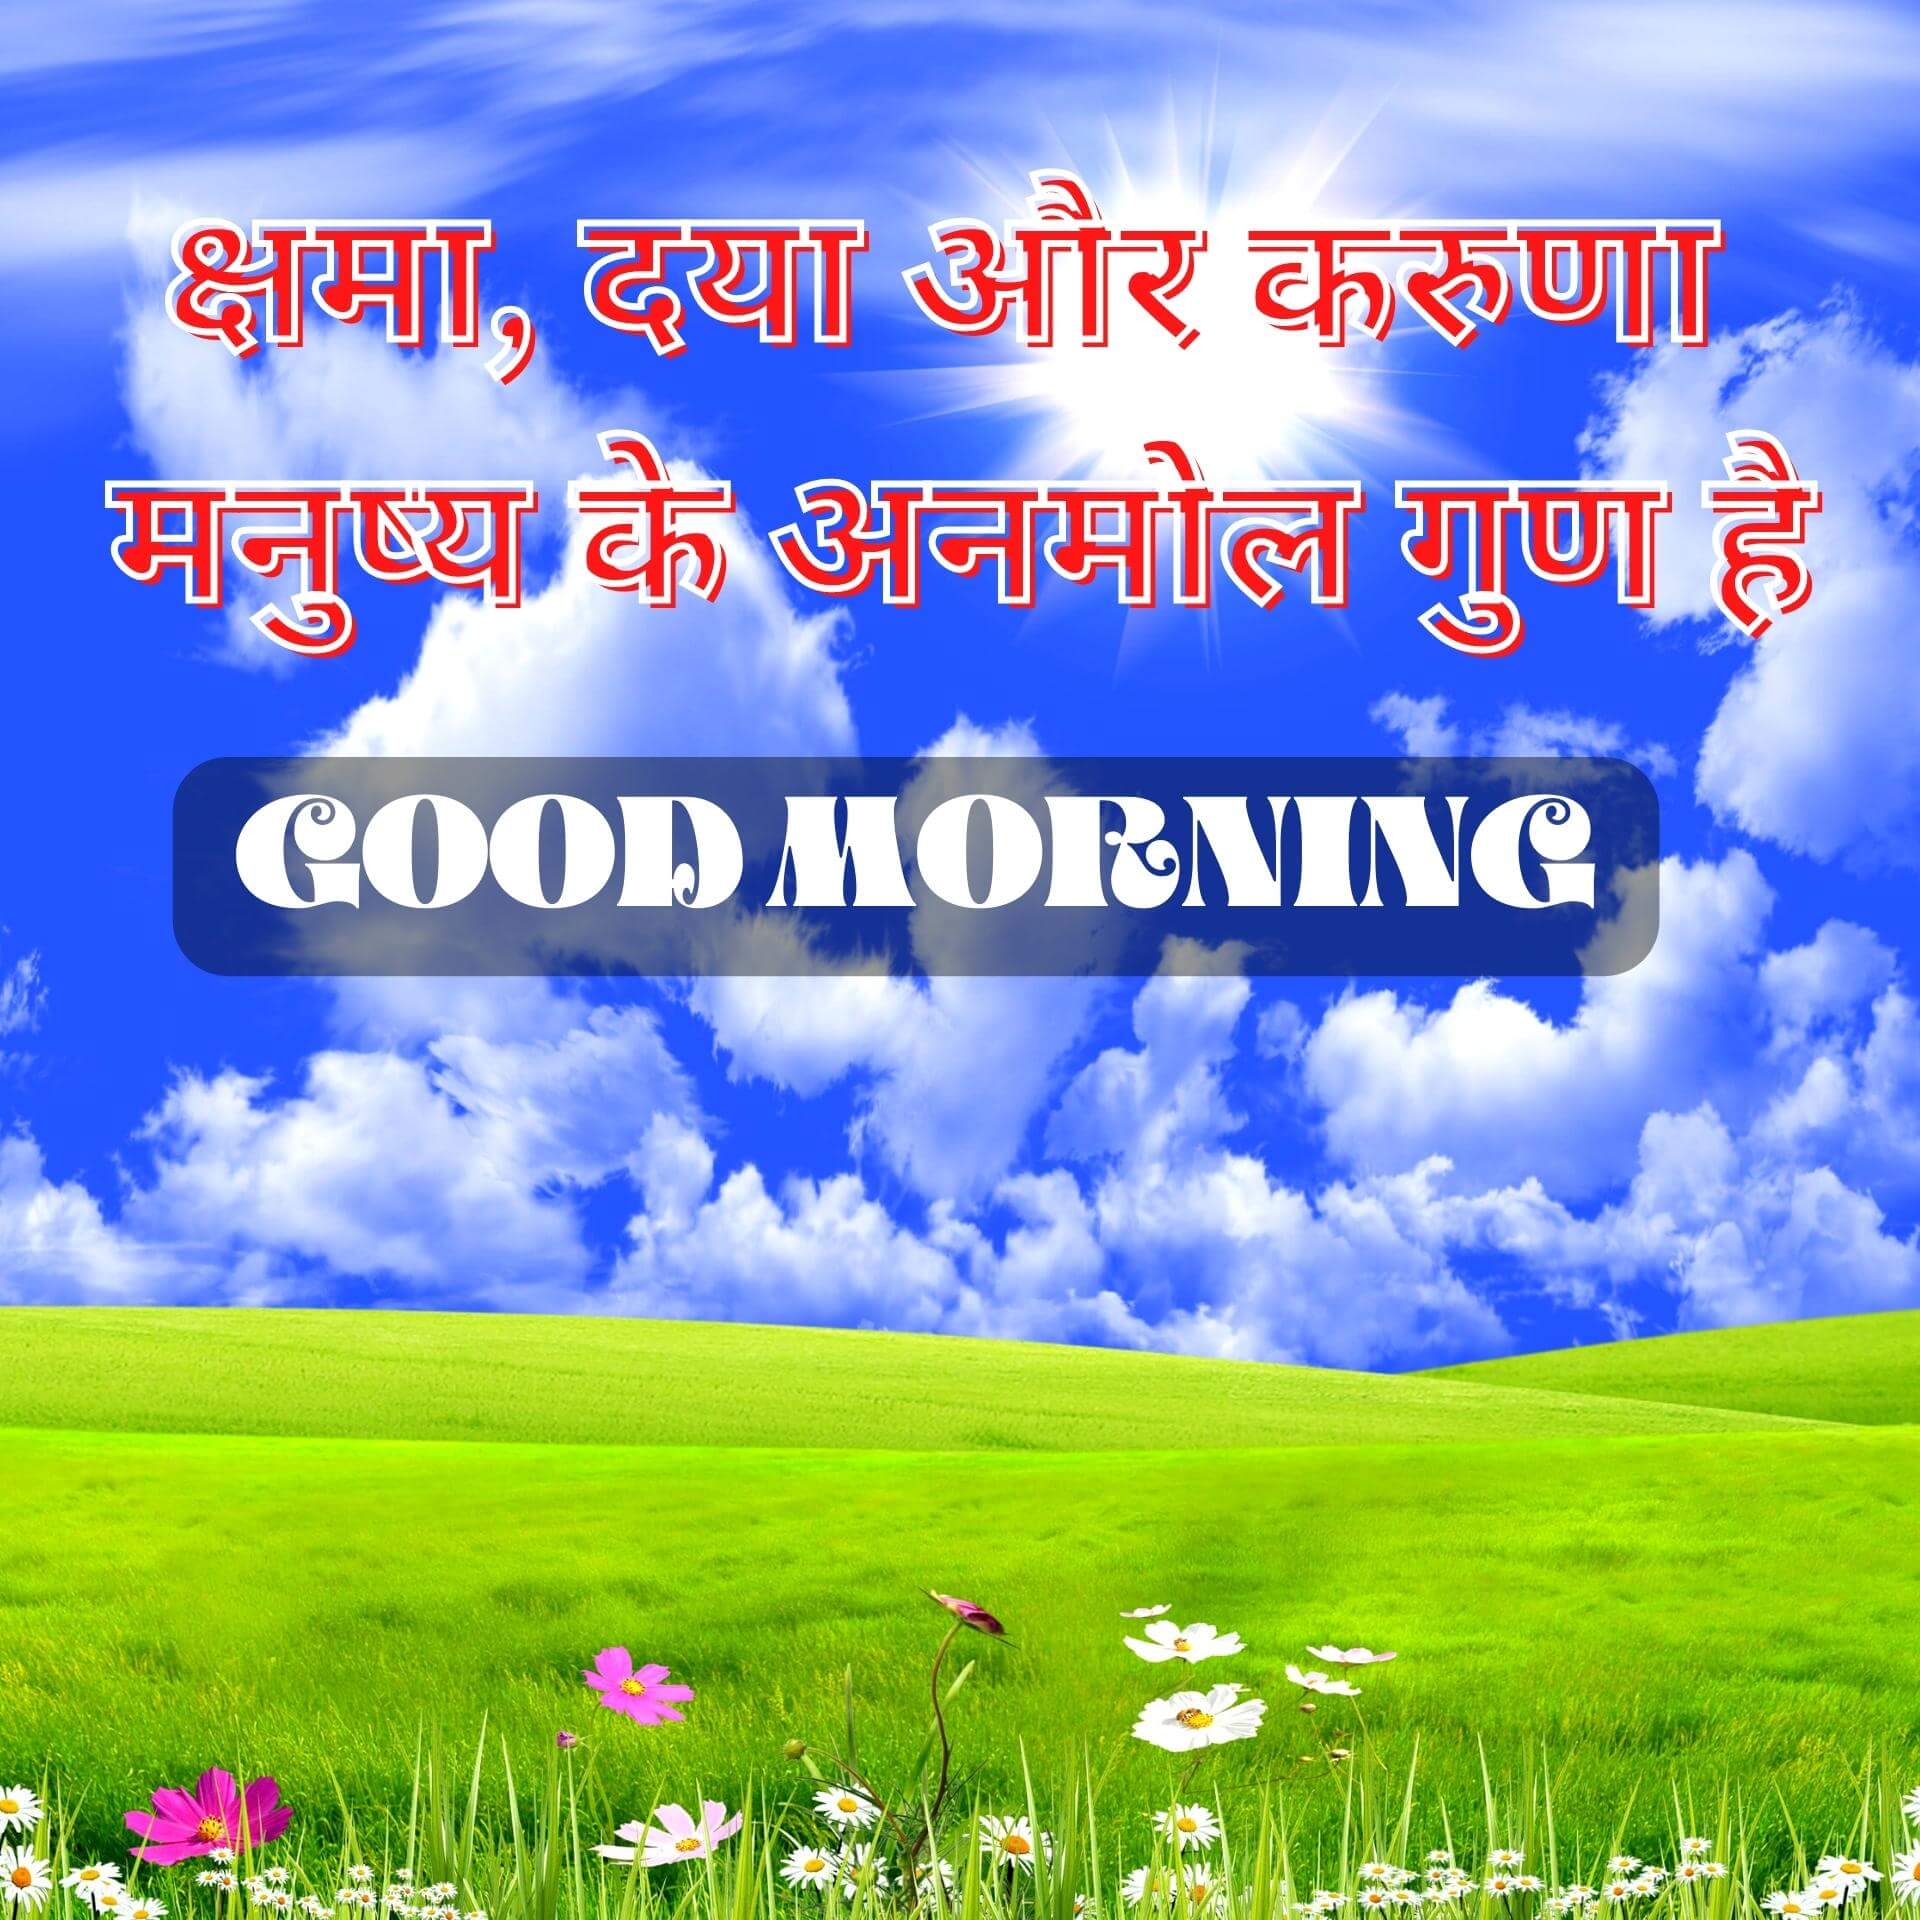 Good Morning Images With Hindi Quotes Wallpaper Free